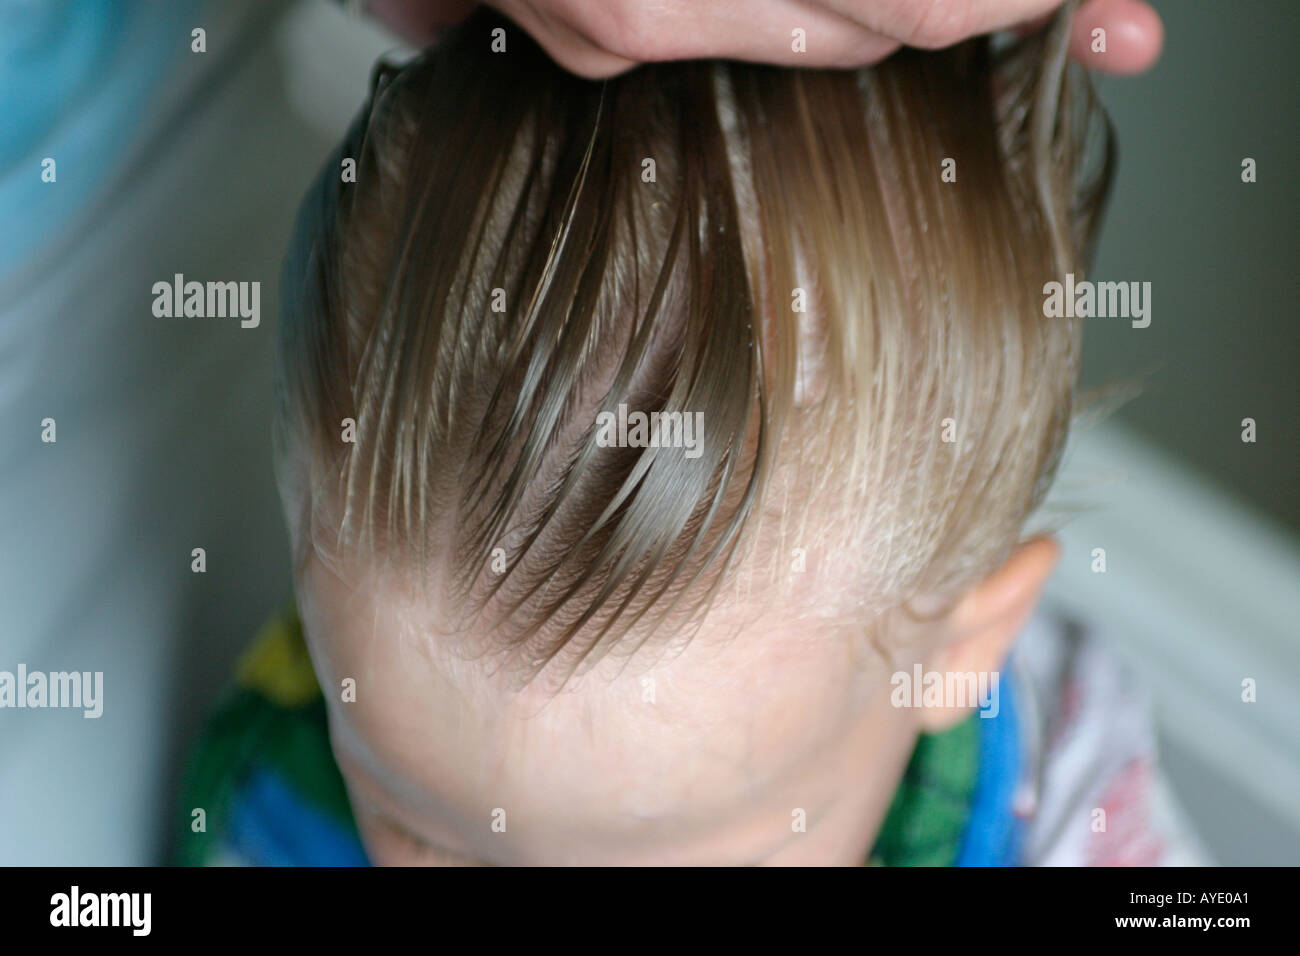 Hair Lice Removal Stock Photos Hair Lice Removal Stock Images